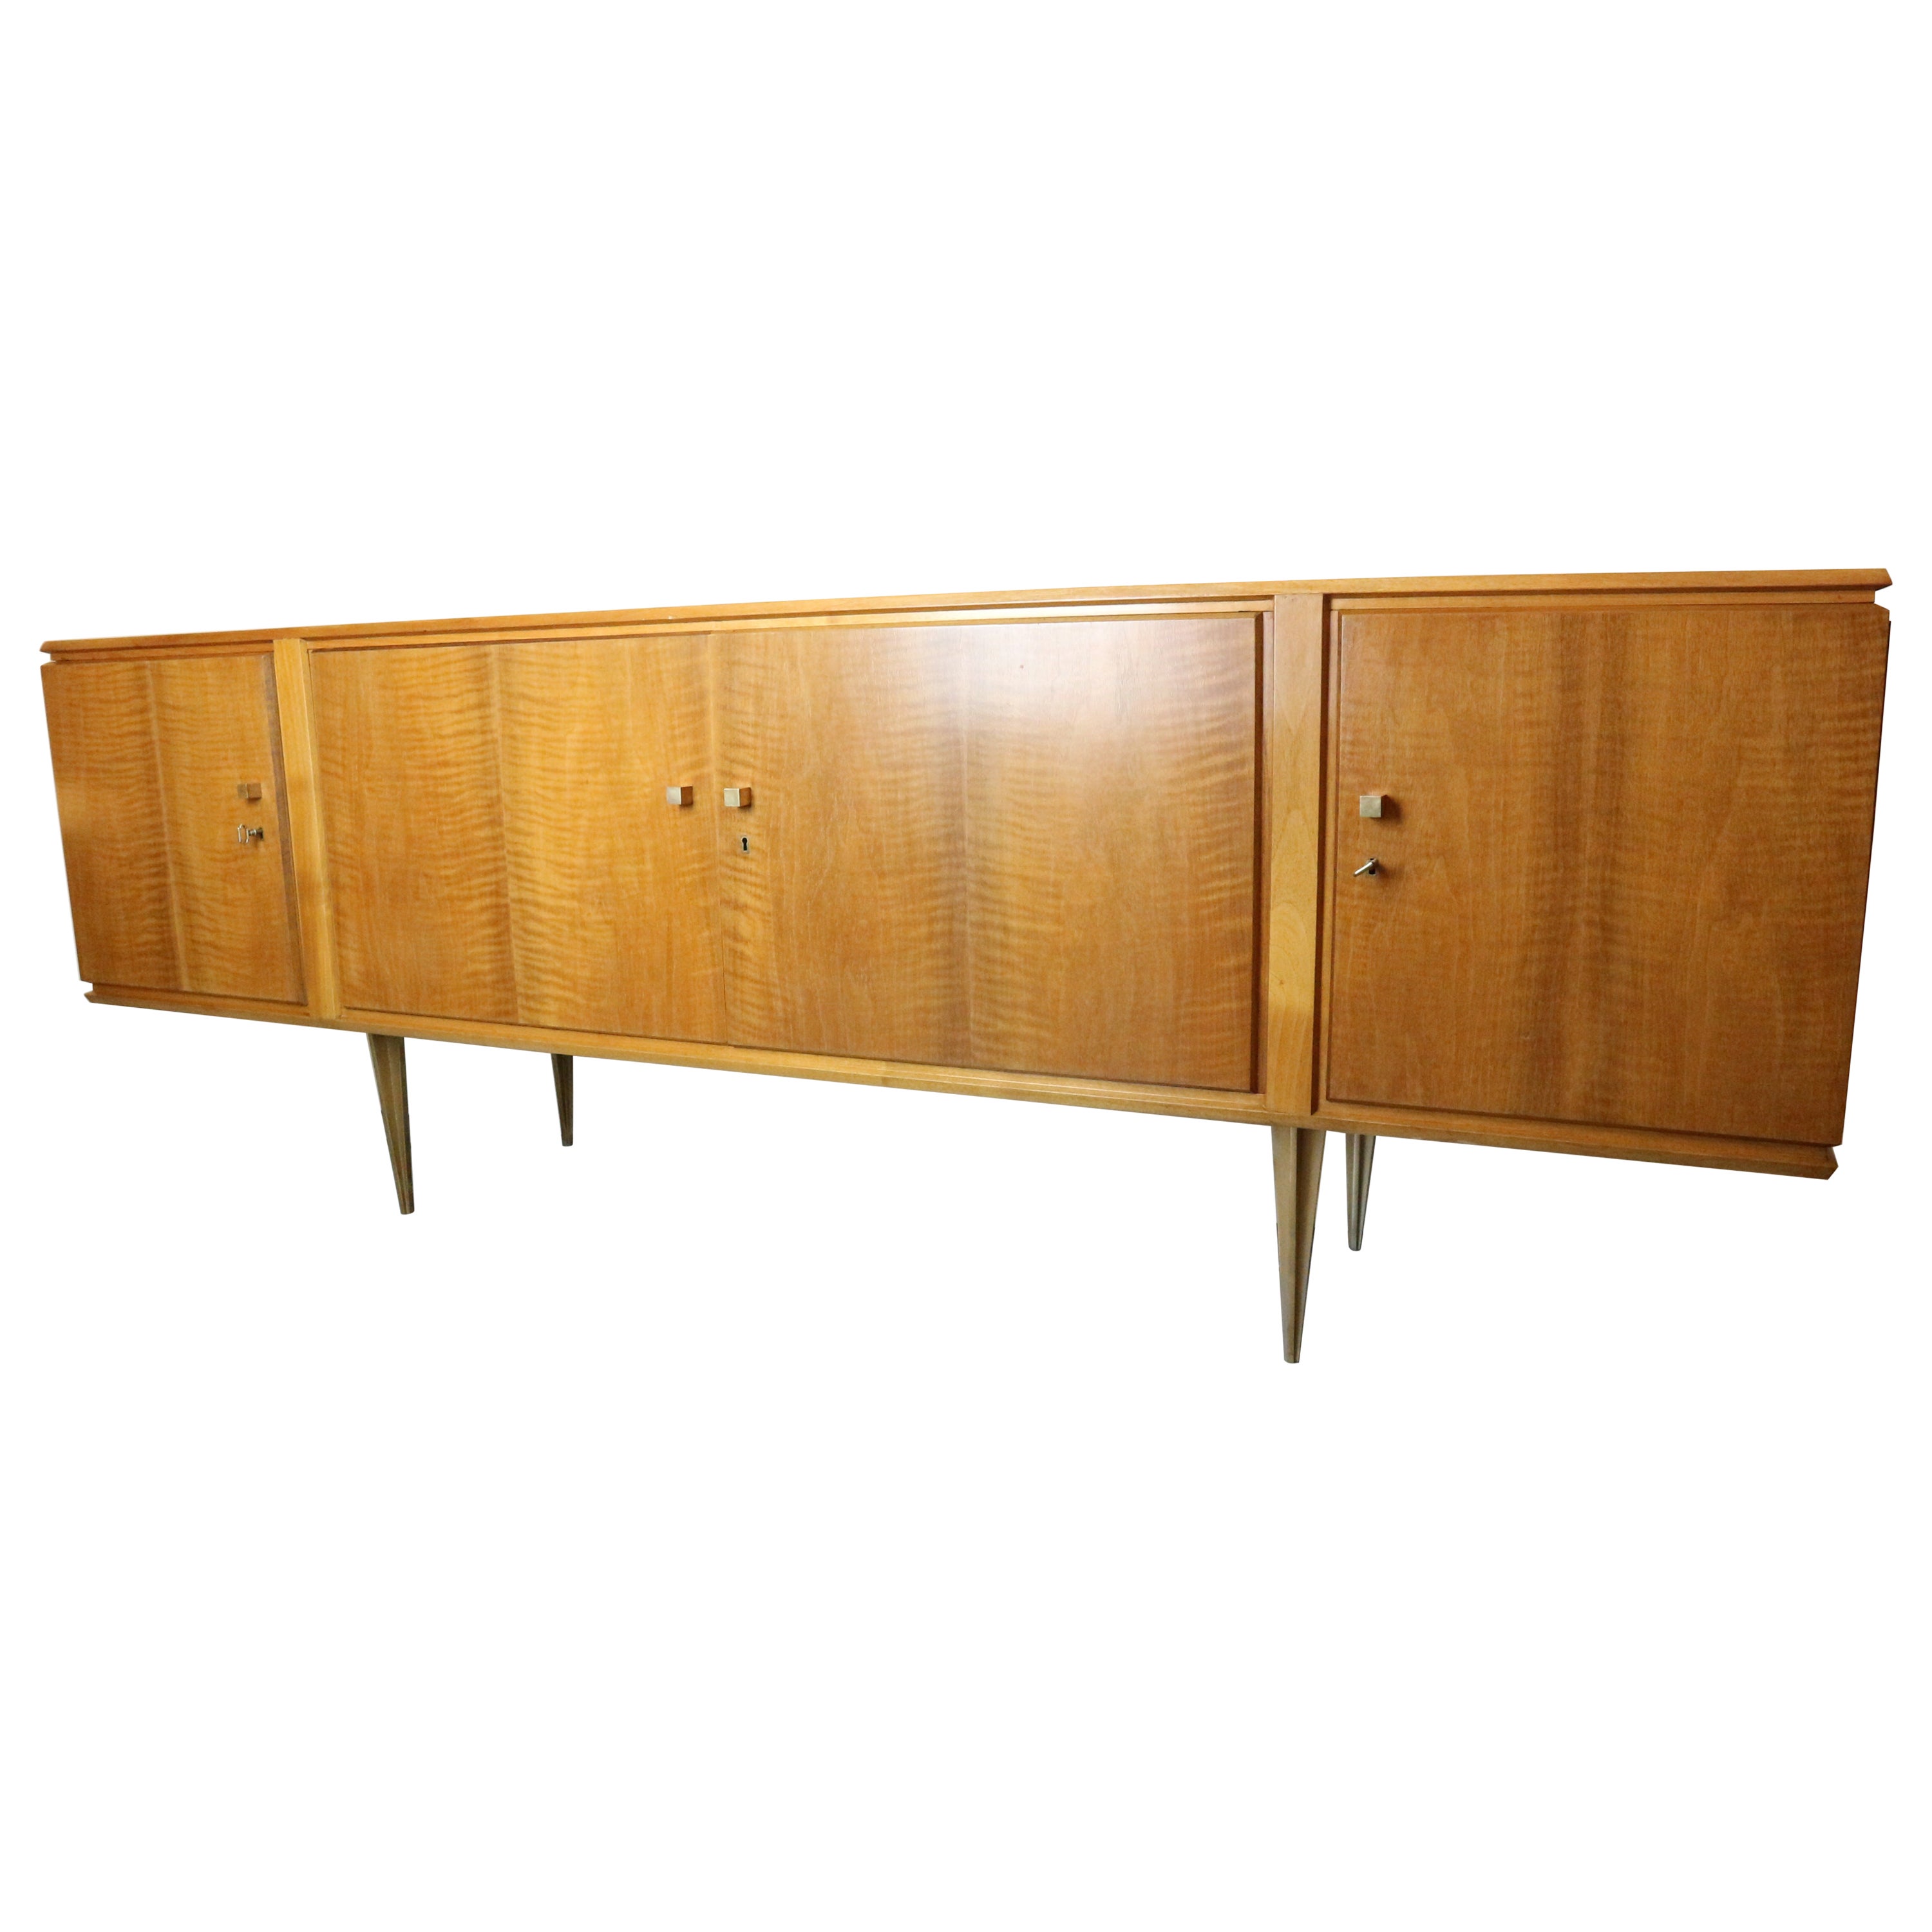 Vintage brass / light wood exclusive sideboard with drawers and shelves, 1960s For Sale